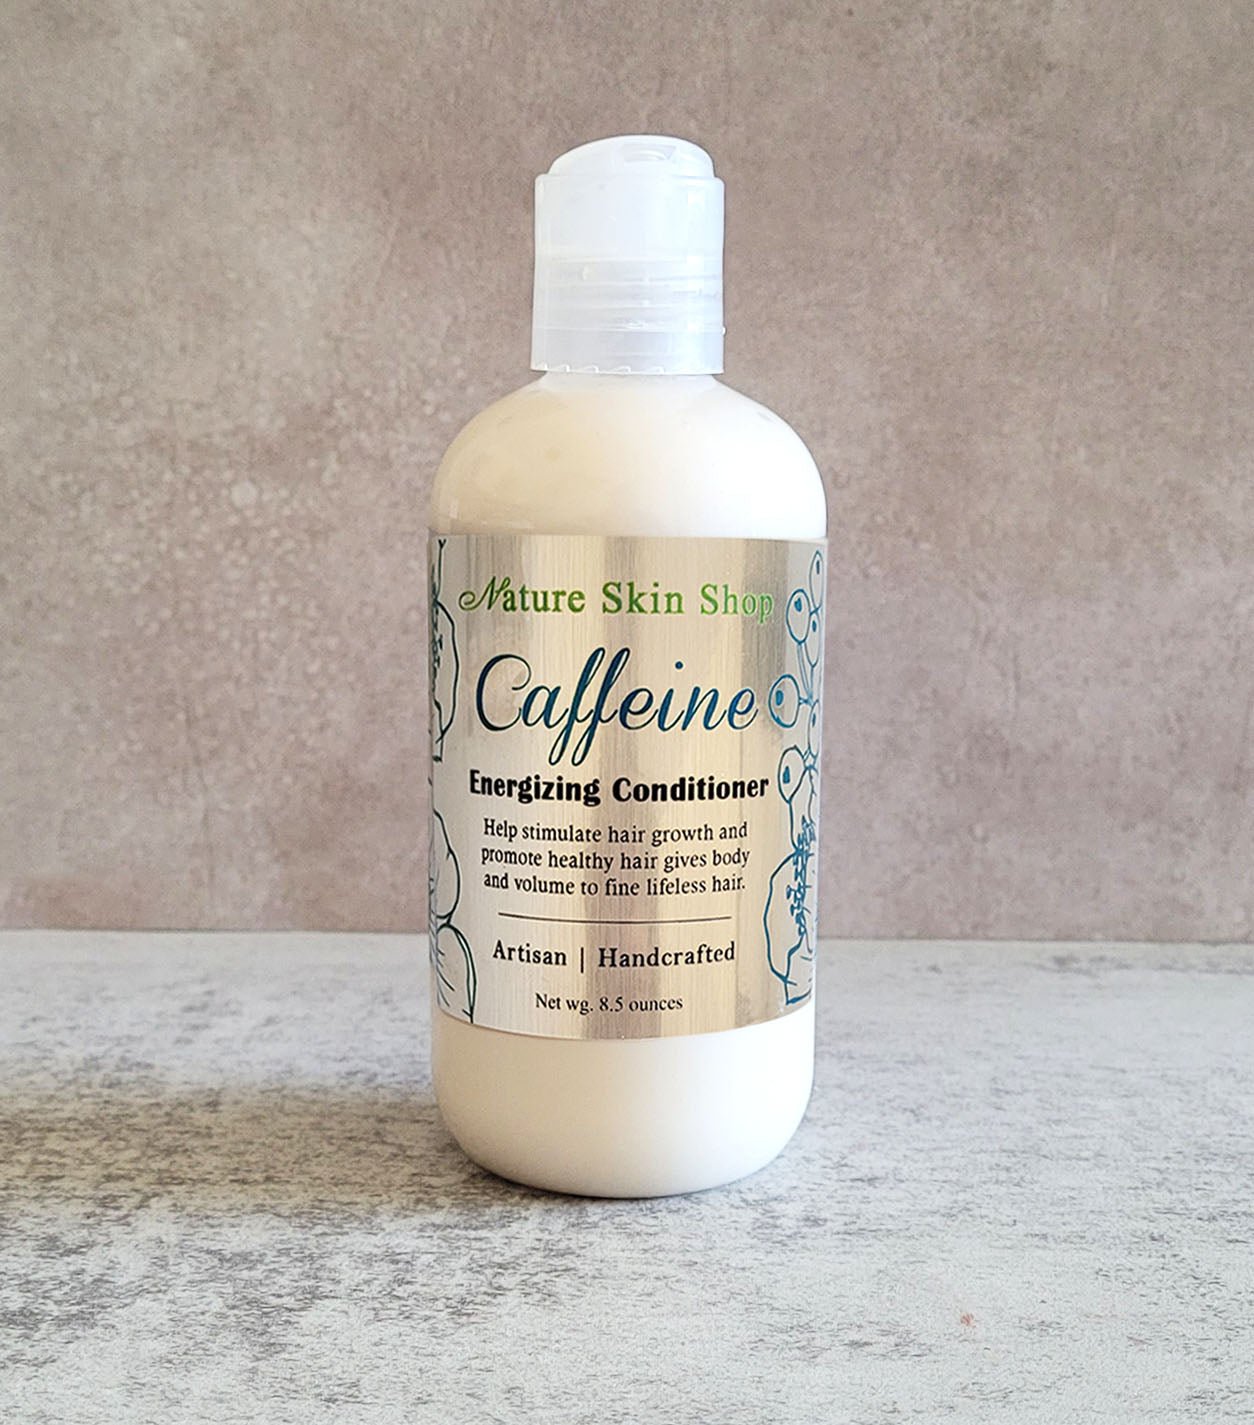 Caffeine Energizing Conditioner For Fuller Hair and Stop Hair Loss - Nature Skin Shop